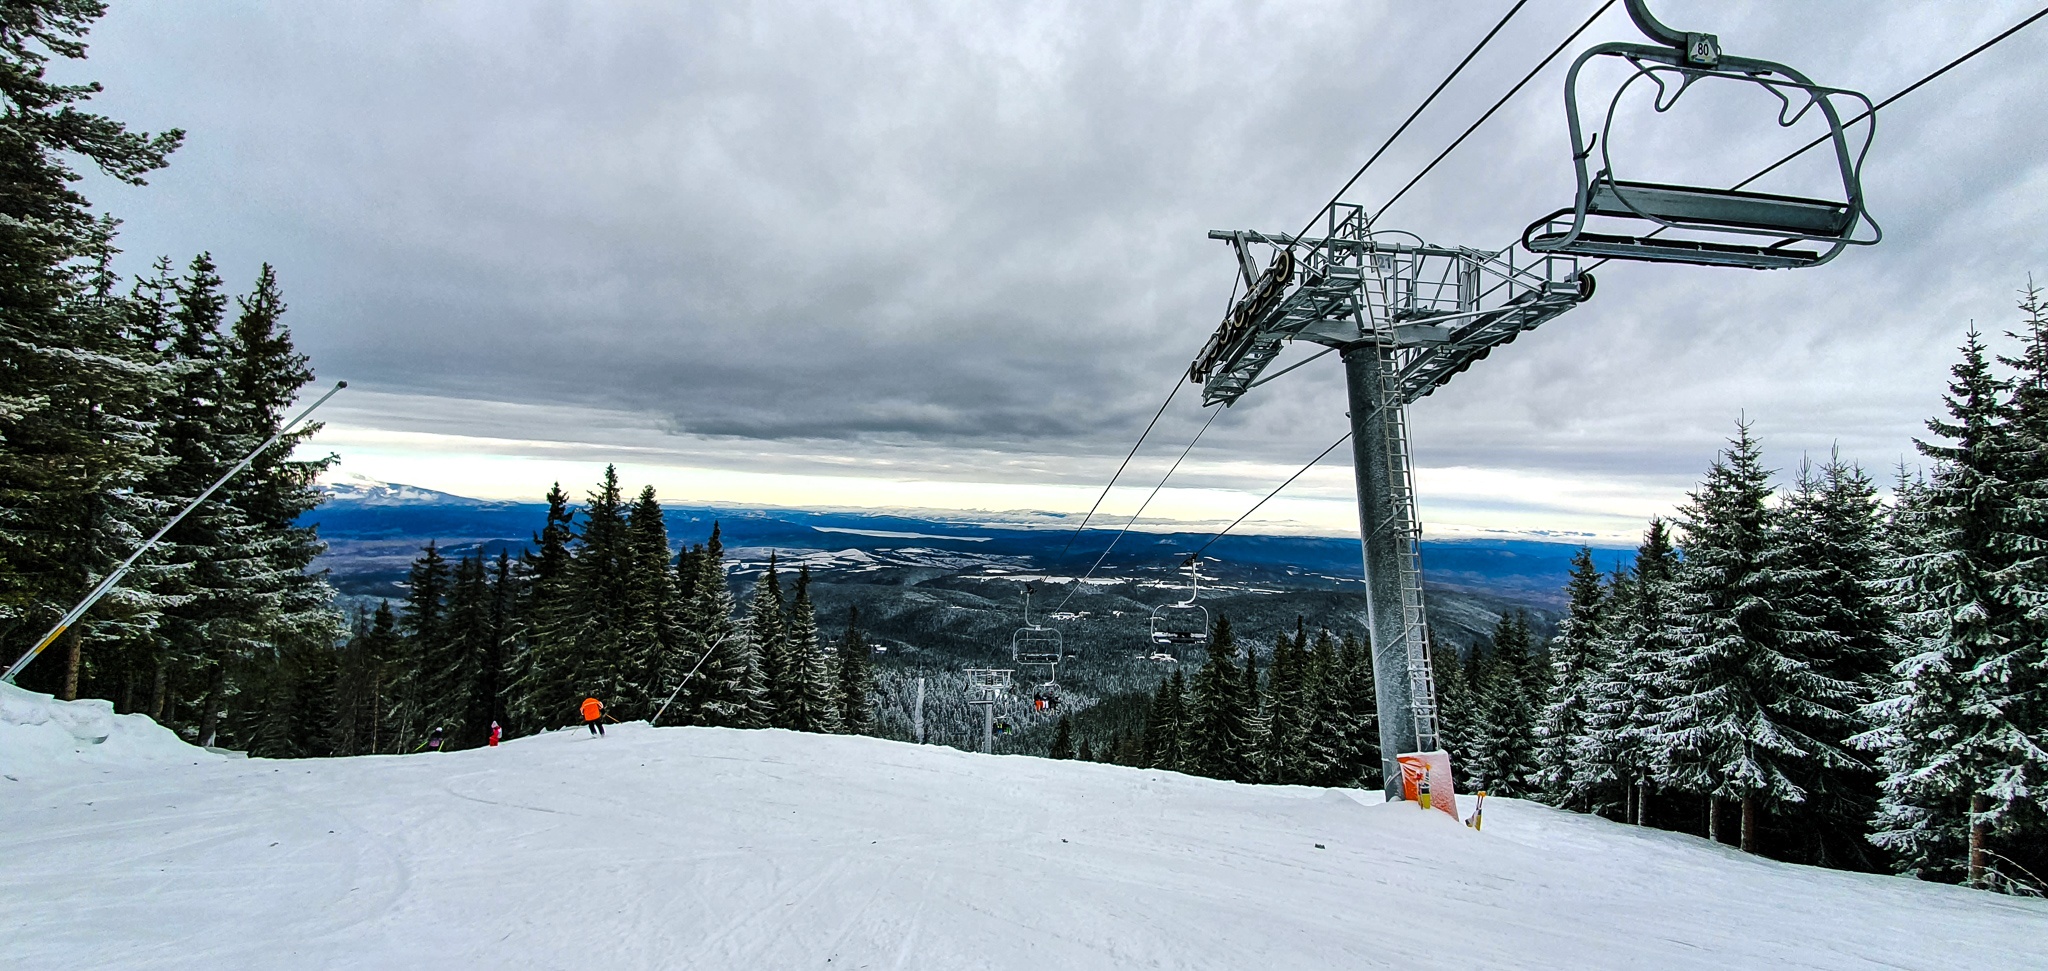 Skiing in Borovets